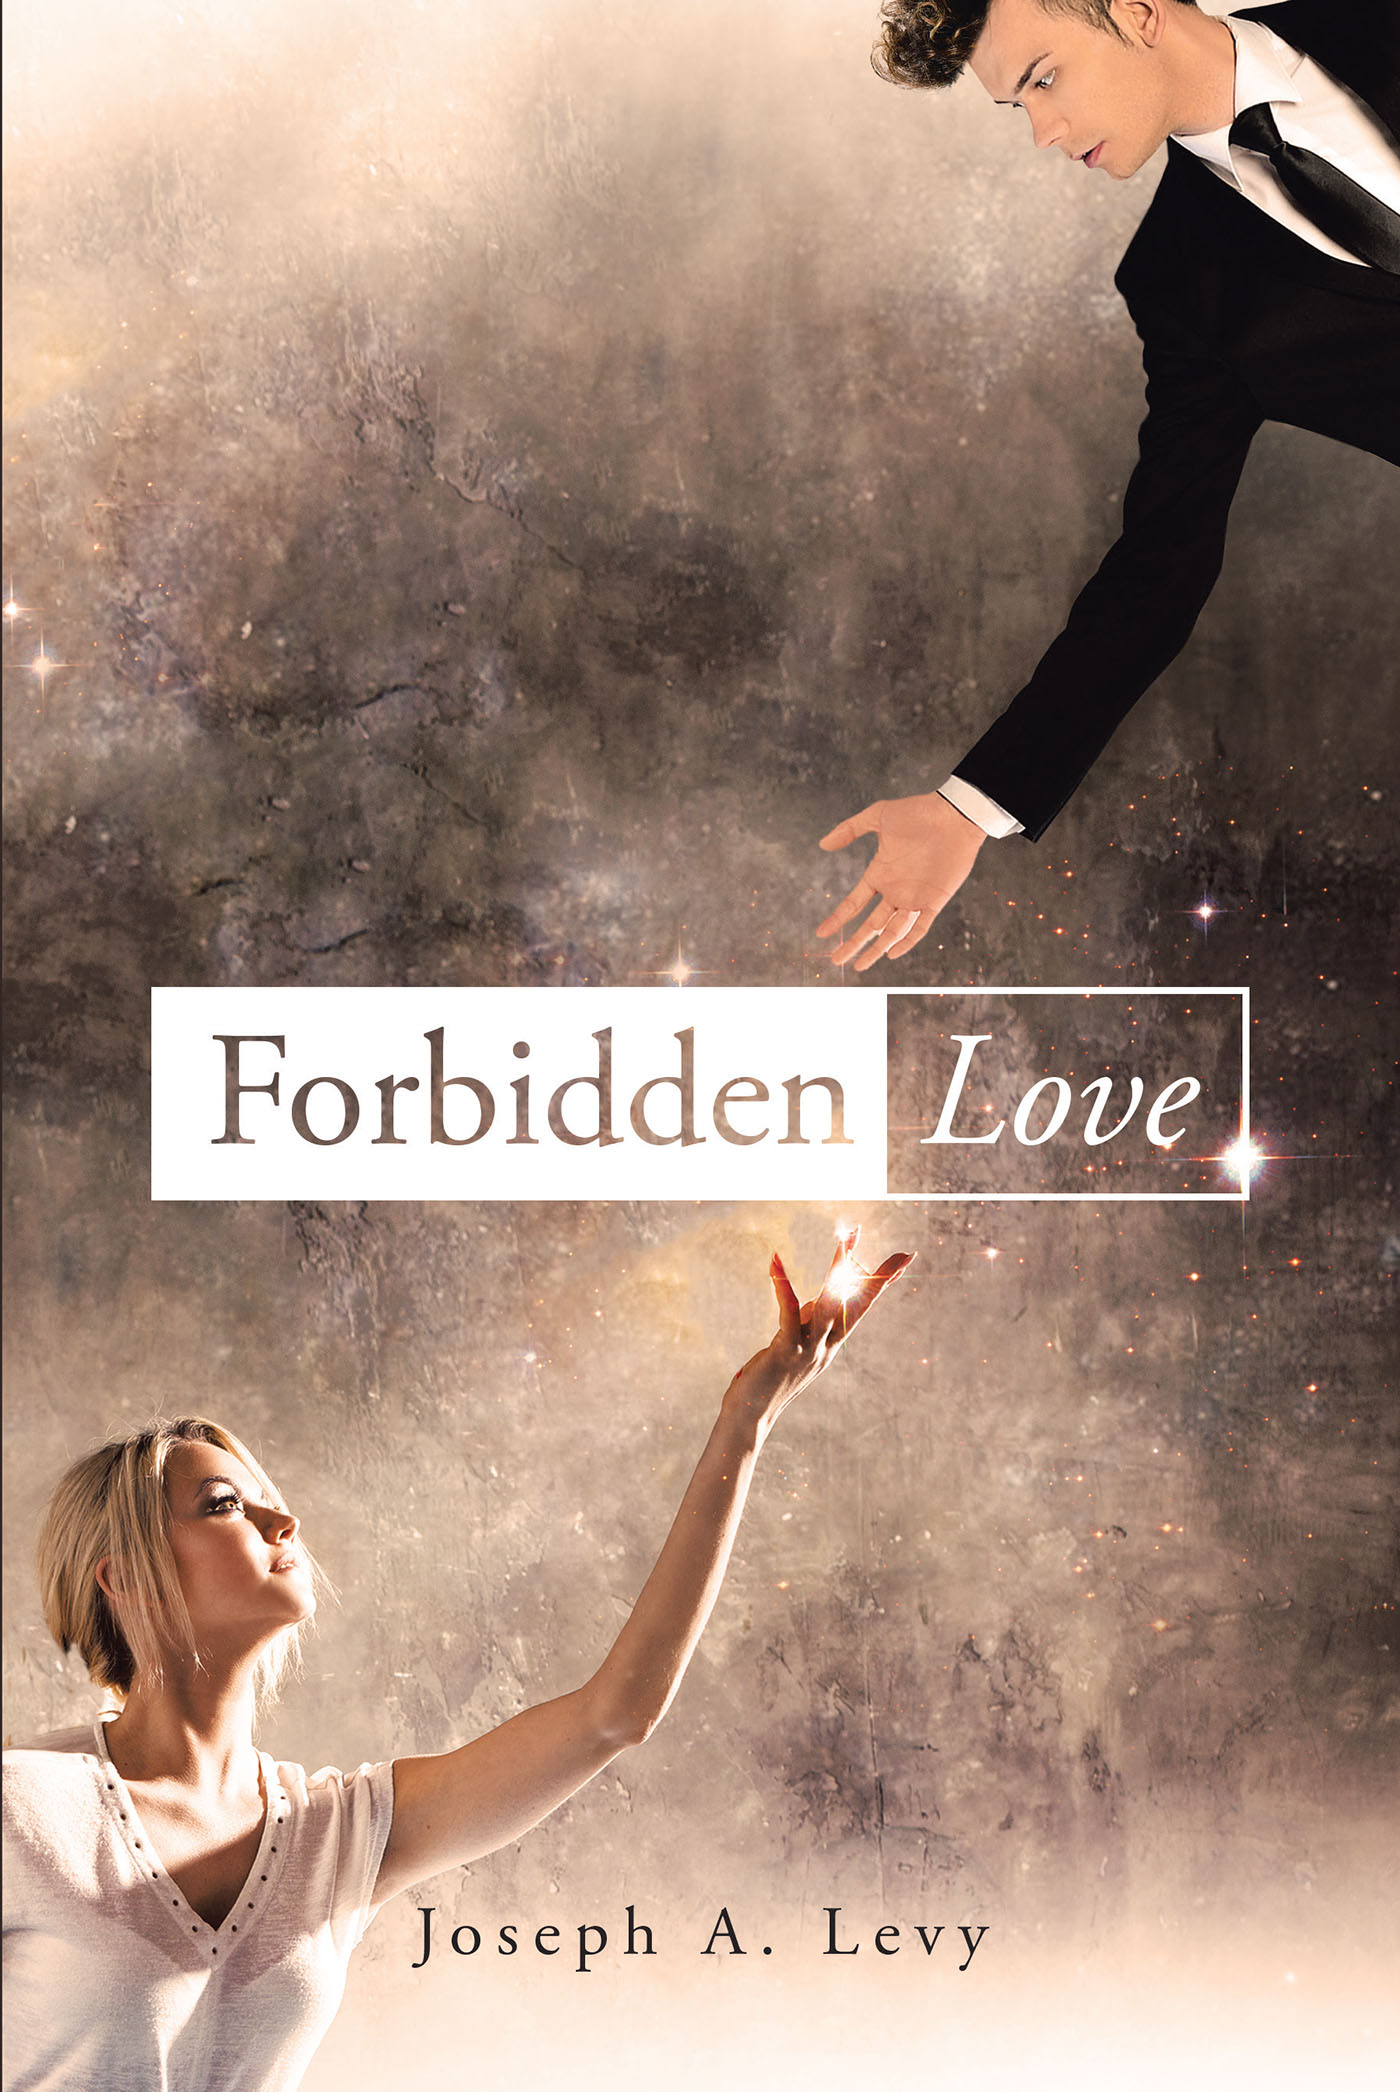 Forbidden Love Cover Image